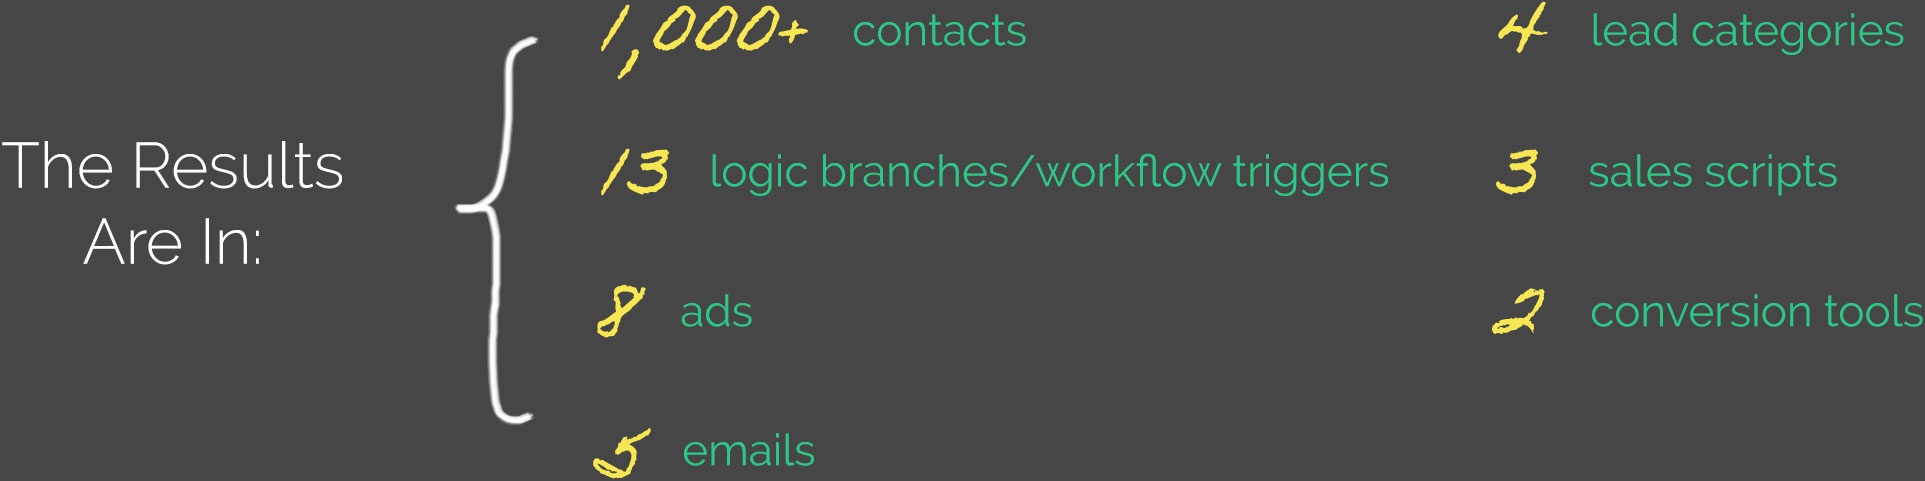 The Results Are In: 1,000+ contacts, 13 logic branches/workflow triggers, 8 ads, 5 emails, 4 lead categories, 3 sales scripts, 2 conversion tools.